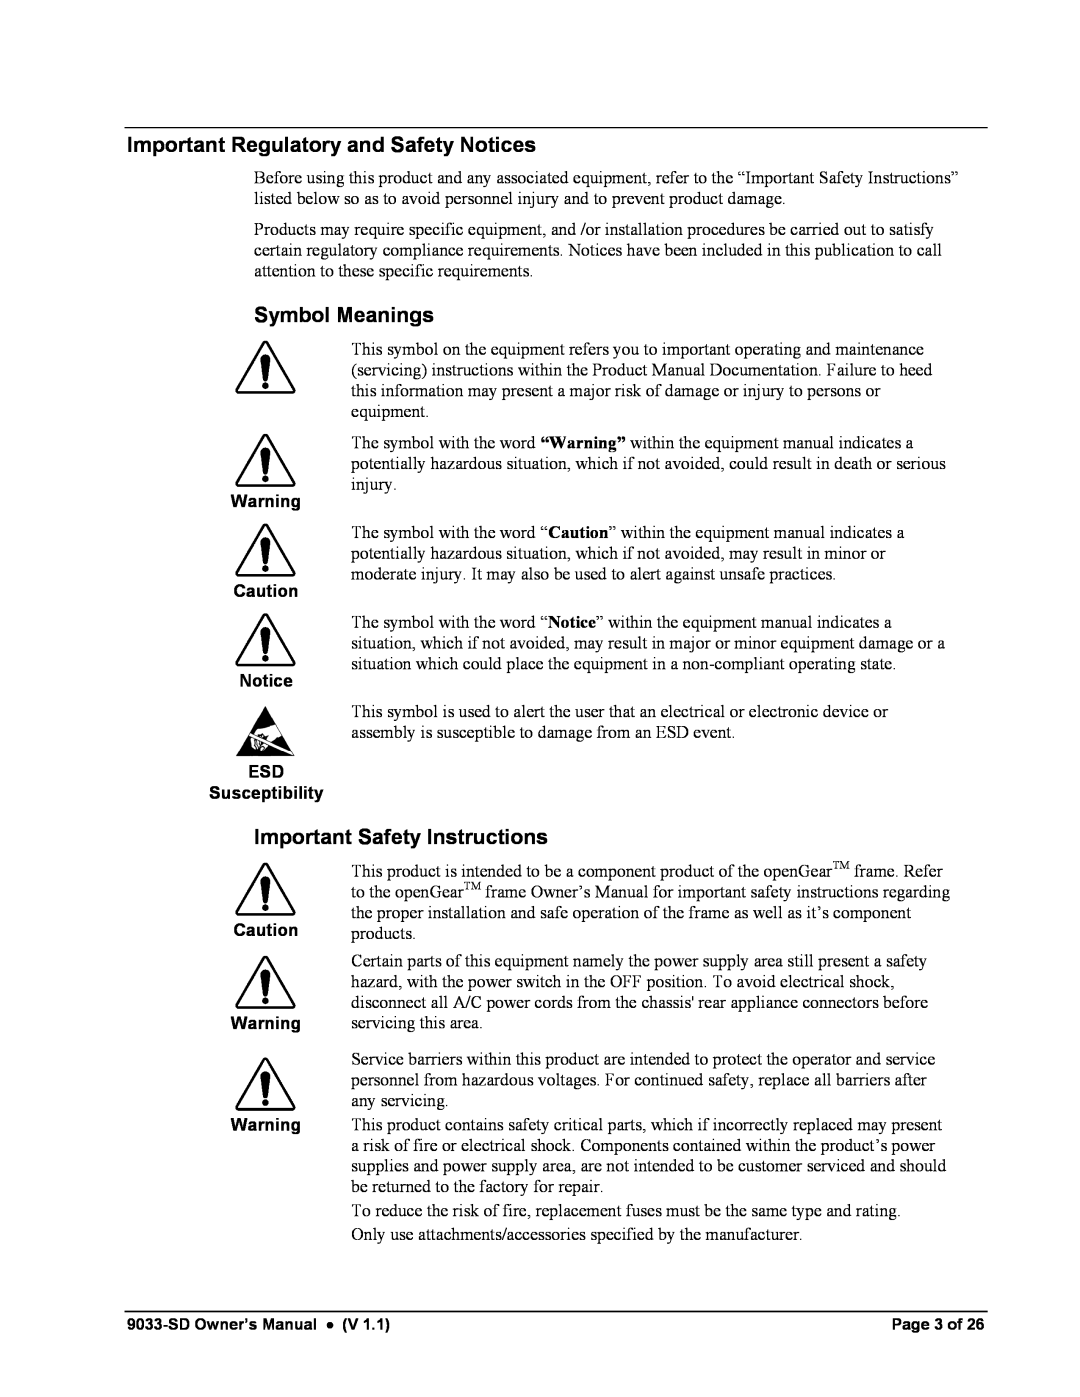 Cobalt Networks 9033-SD Important Regulatory and Safety Notices, Symbol Meanings, Important Safety Instructions 